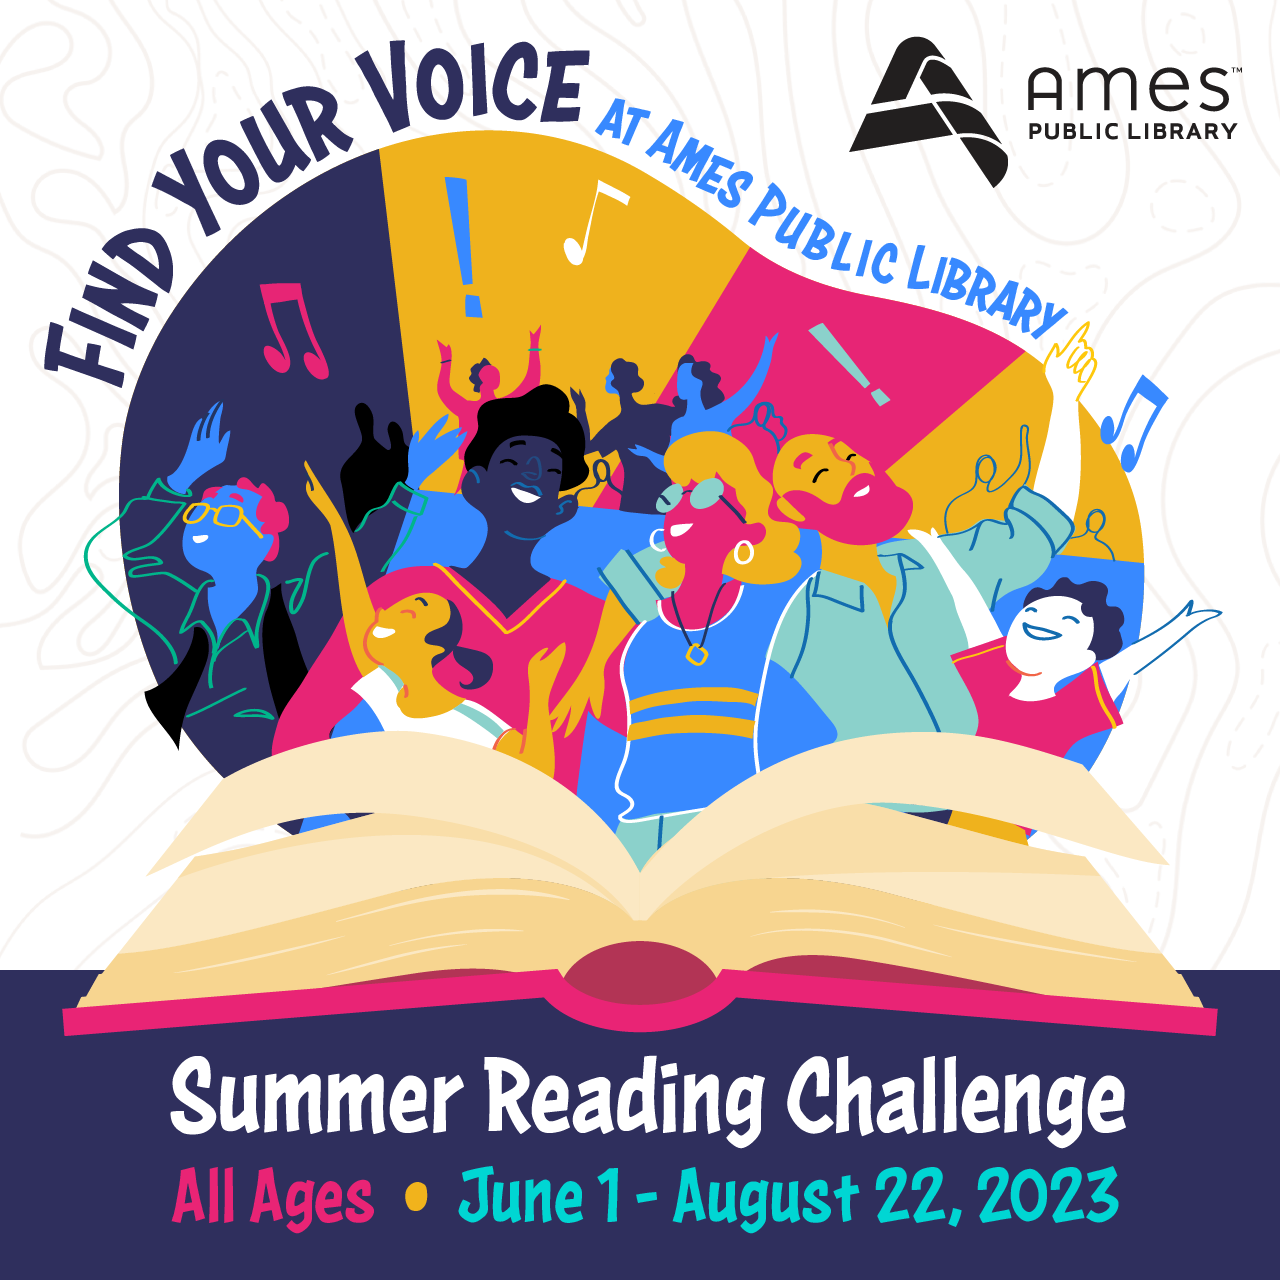 Open Book with celebrating people of all ages coming out for "Find Your Voice" summer reading challenge.